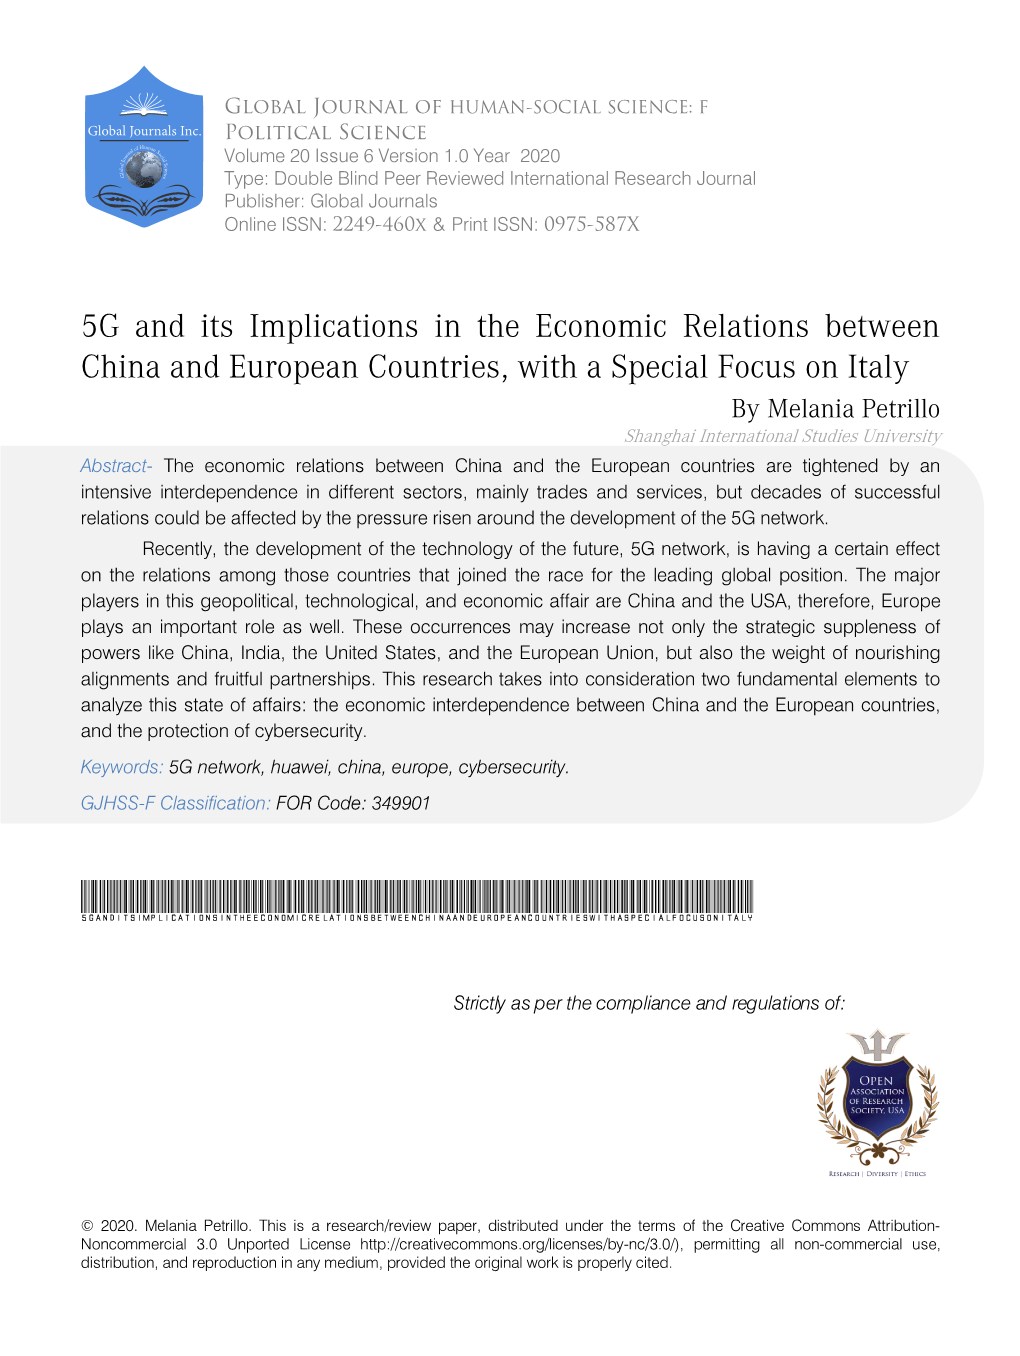 5G and Its Implications in the Economic Relations Between China and European Countries, with a Special Focus on Italy